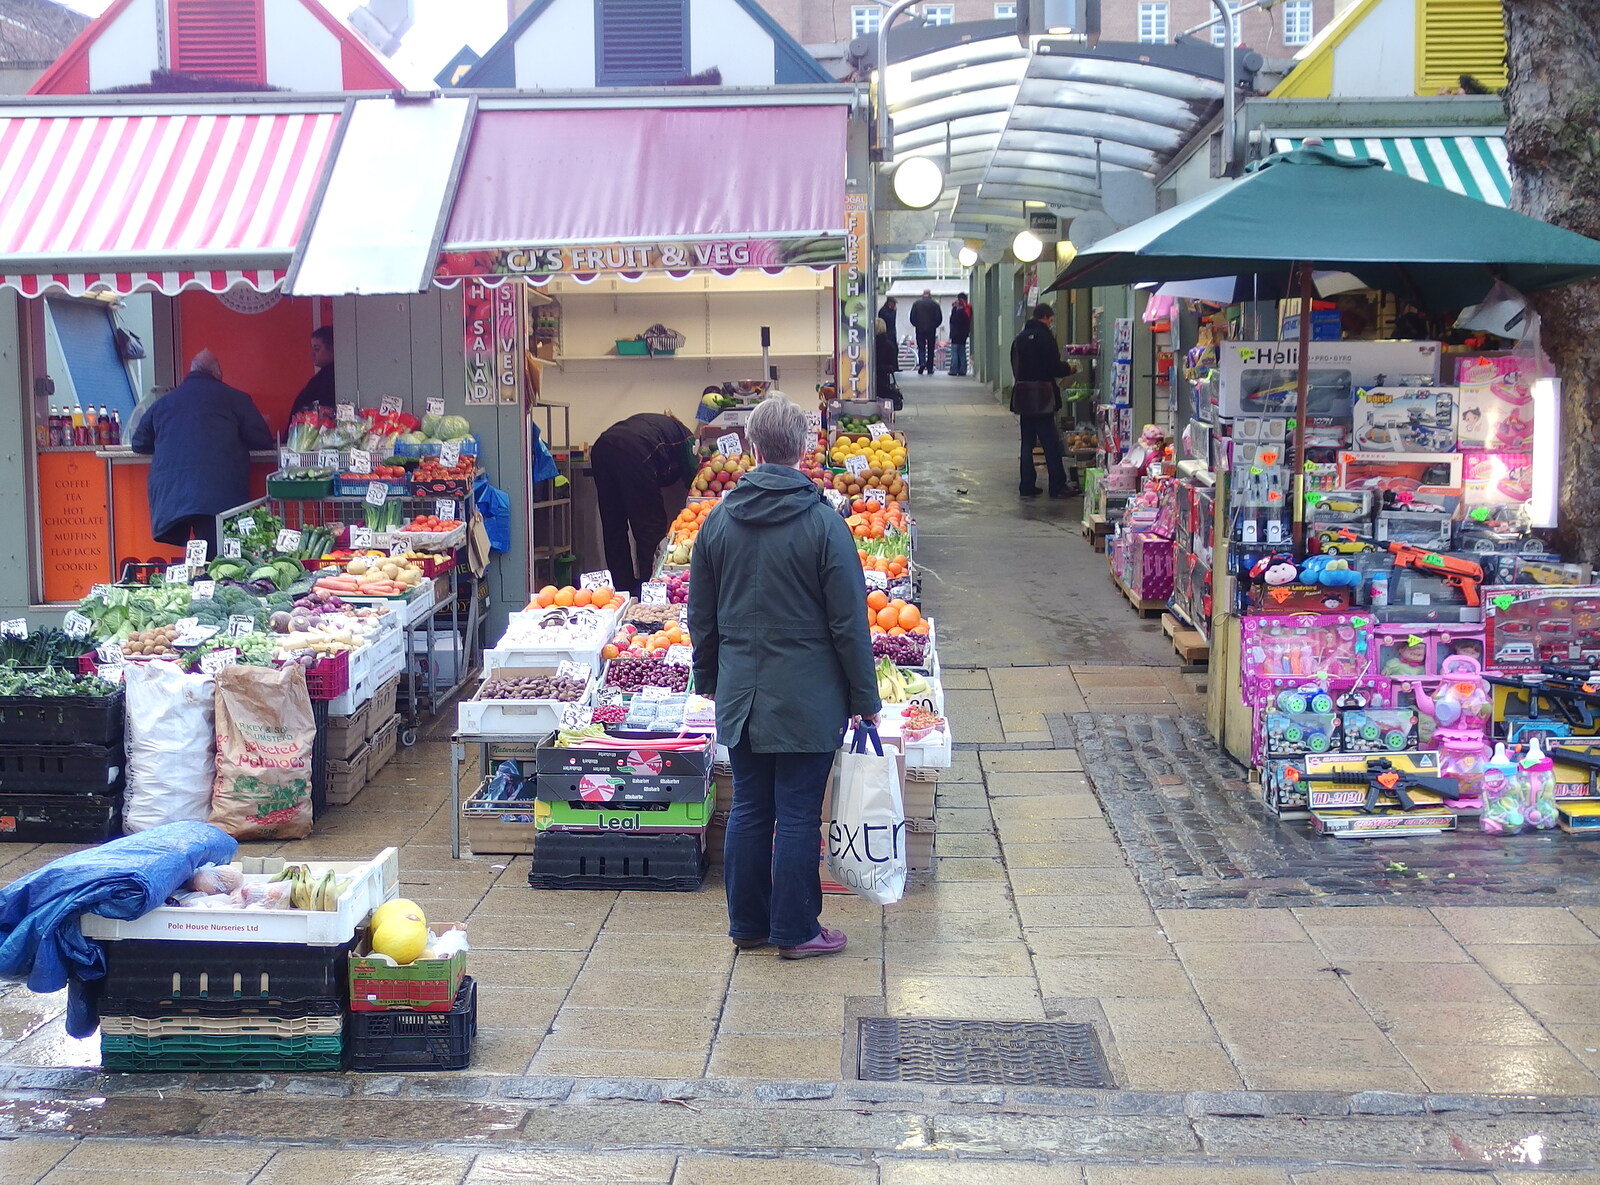 Norwich covered market from A Dragoney Sort of Day, Norwich, Norfolk - 15th February 2014